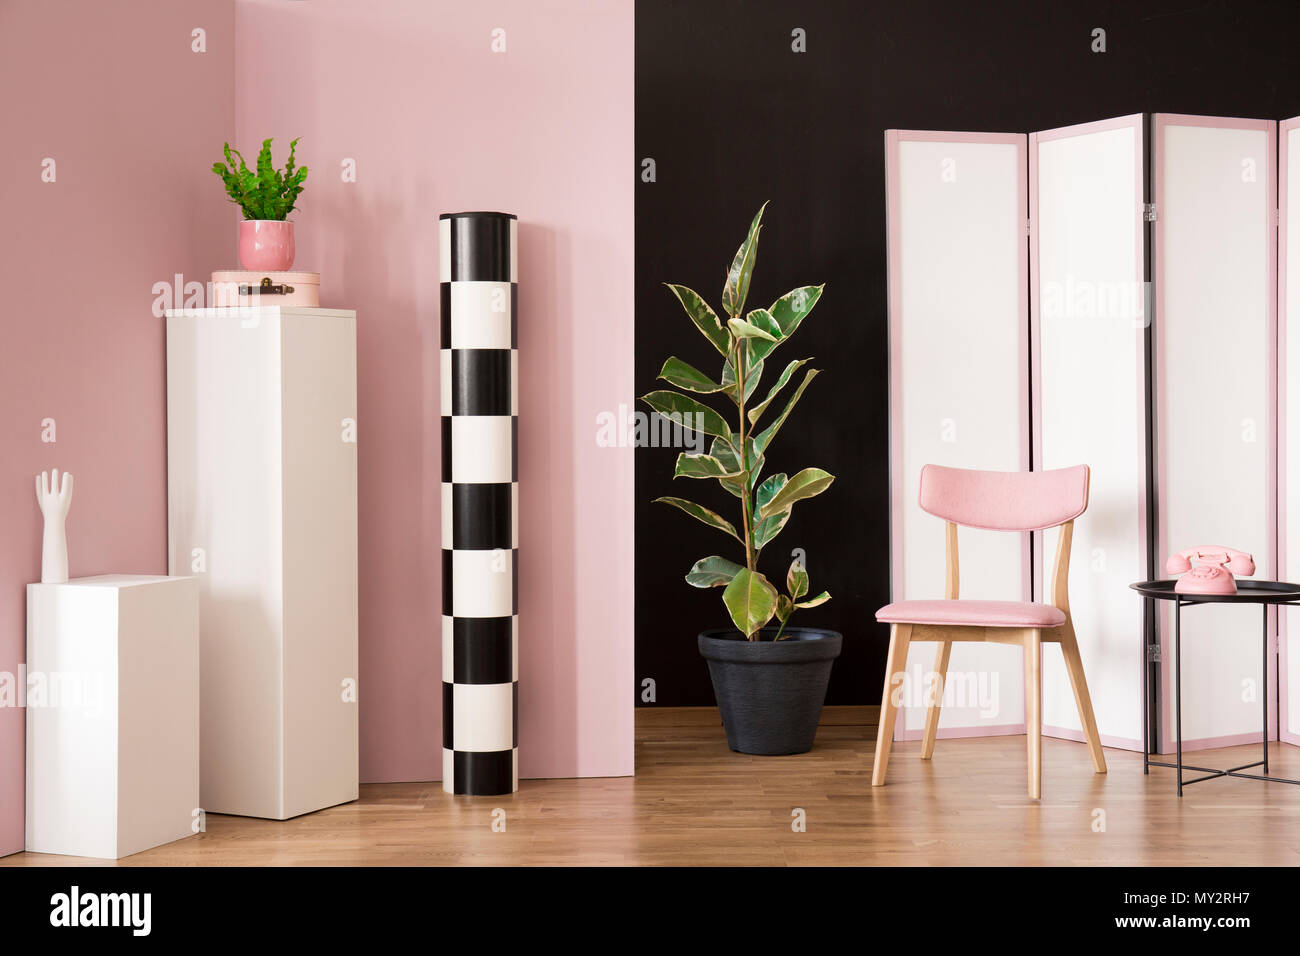 Ficus next to a pink wooden chair in dressing room interior with screen and phone on white pedestal Stock Photo